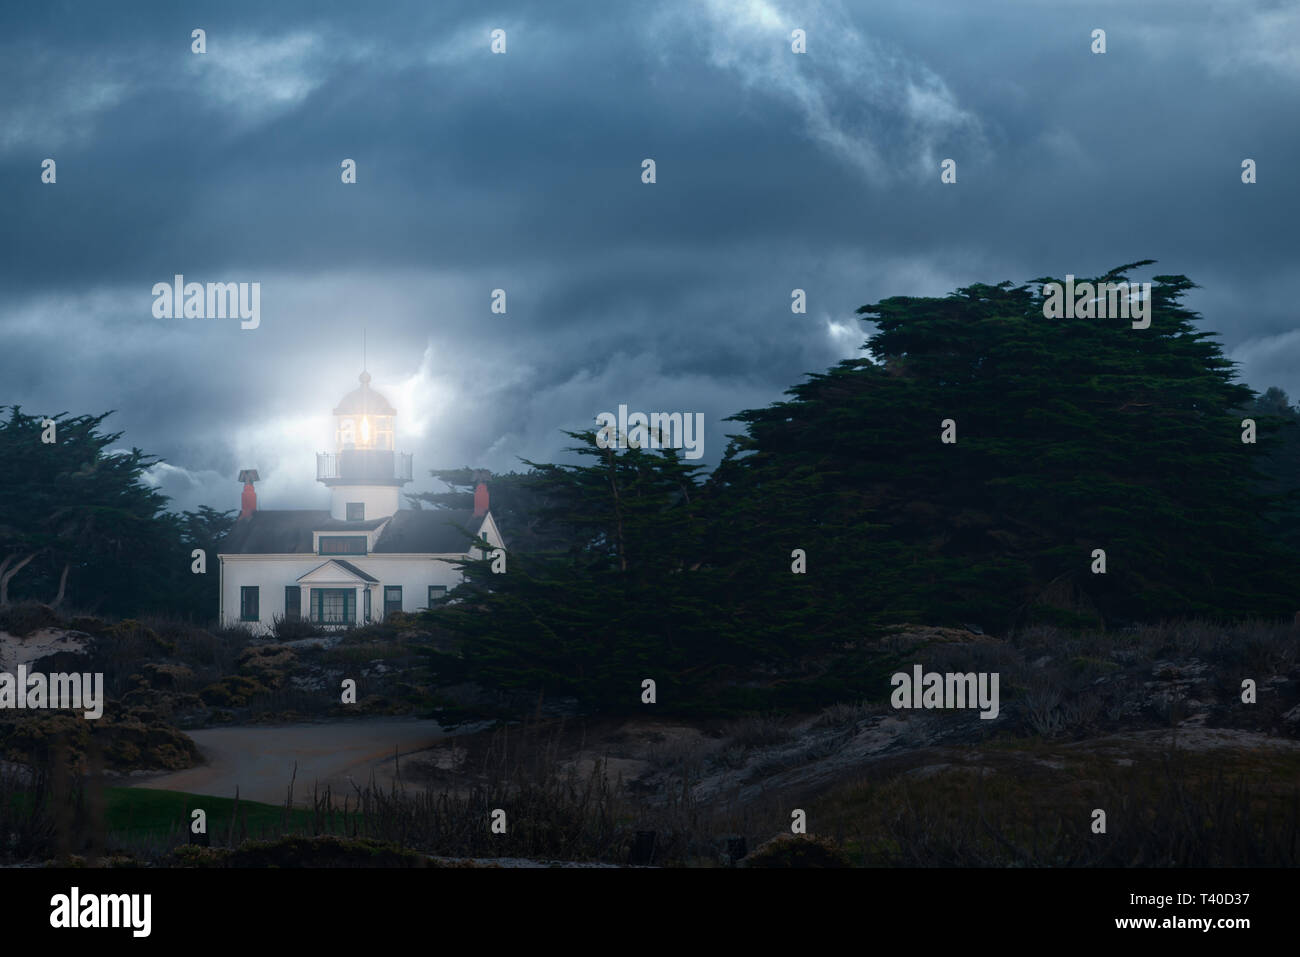 Point Pinos Lighthouse in Pacific Grove California on a stormy night with dramatic clouds. Monterey Peninsula trave destination. Stock Photo